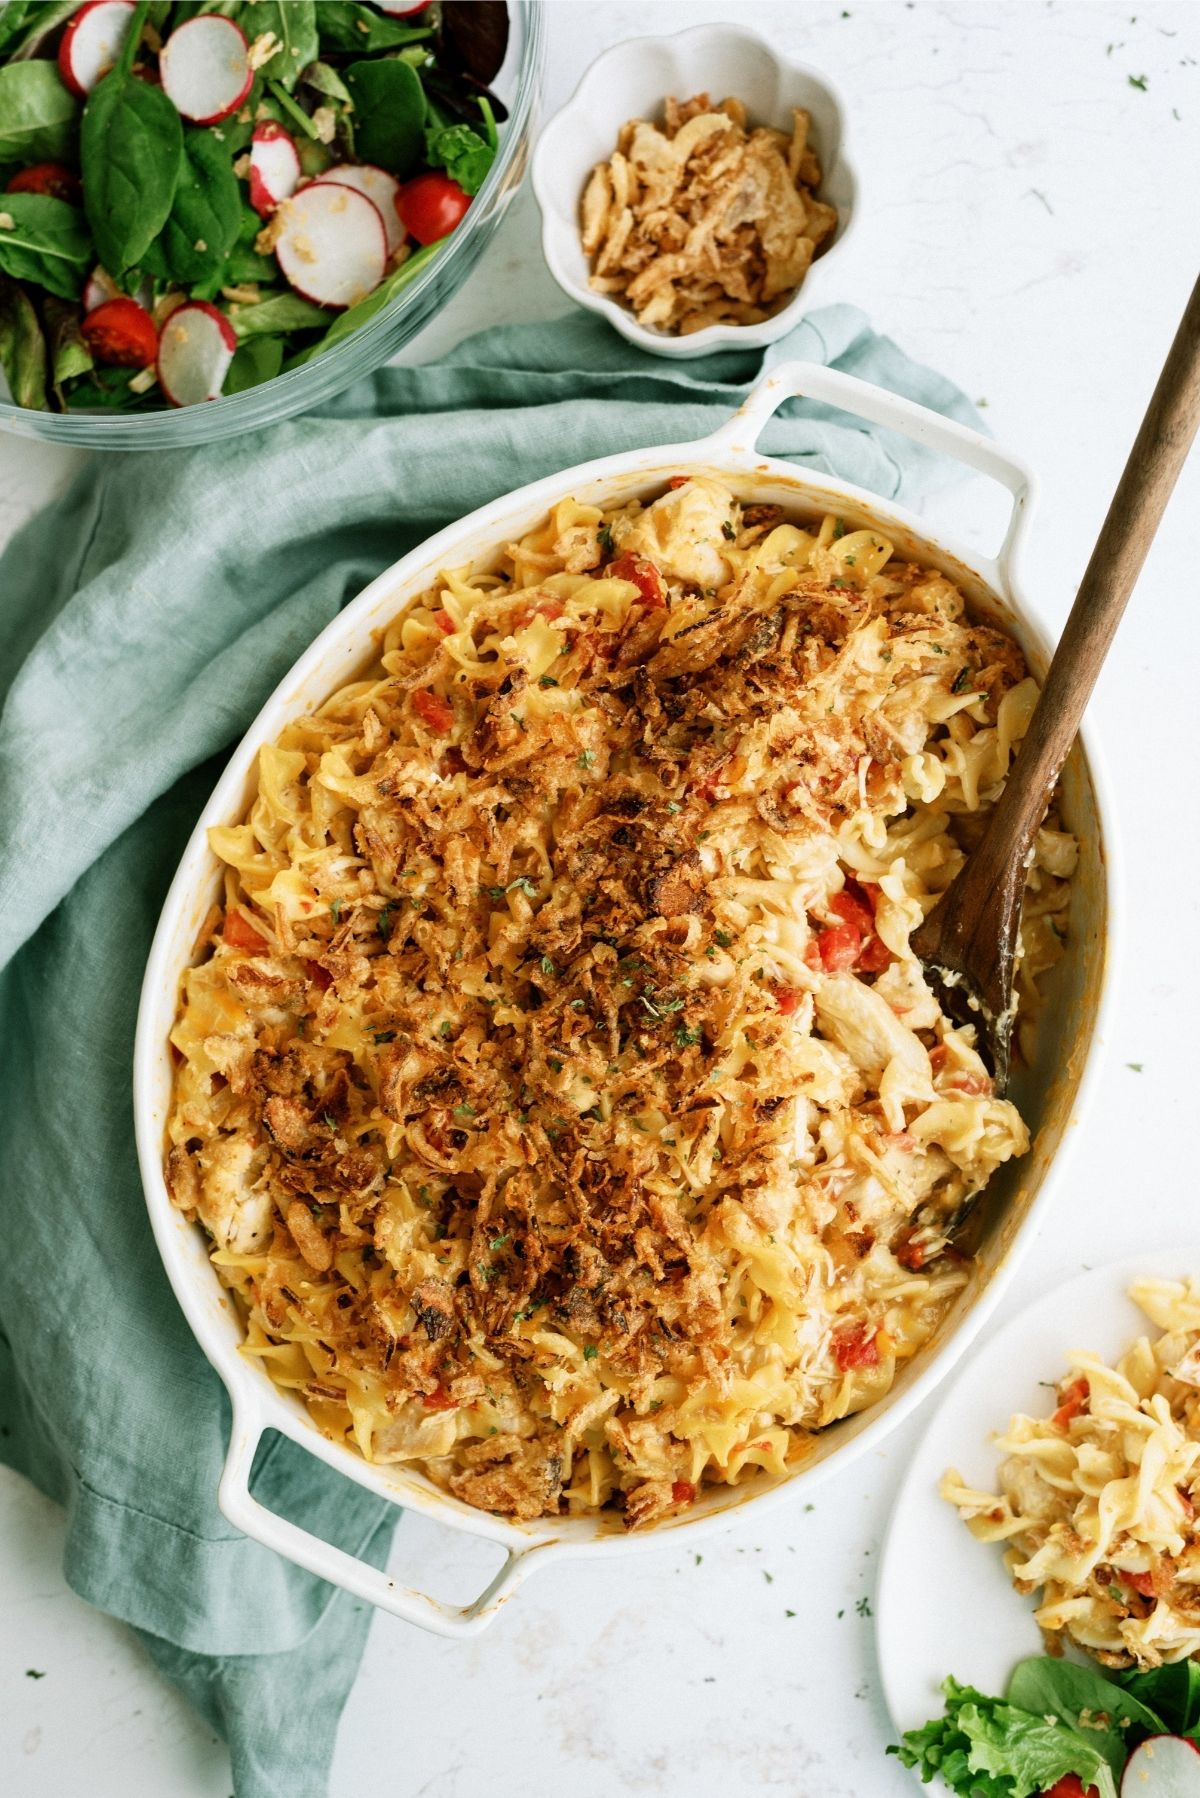 French Onion Chicken Noodle Casserole in a white casserole dish with a wooden spoon